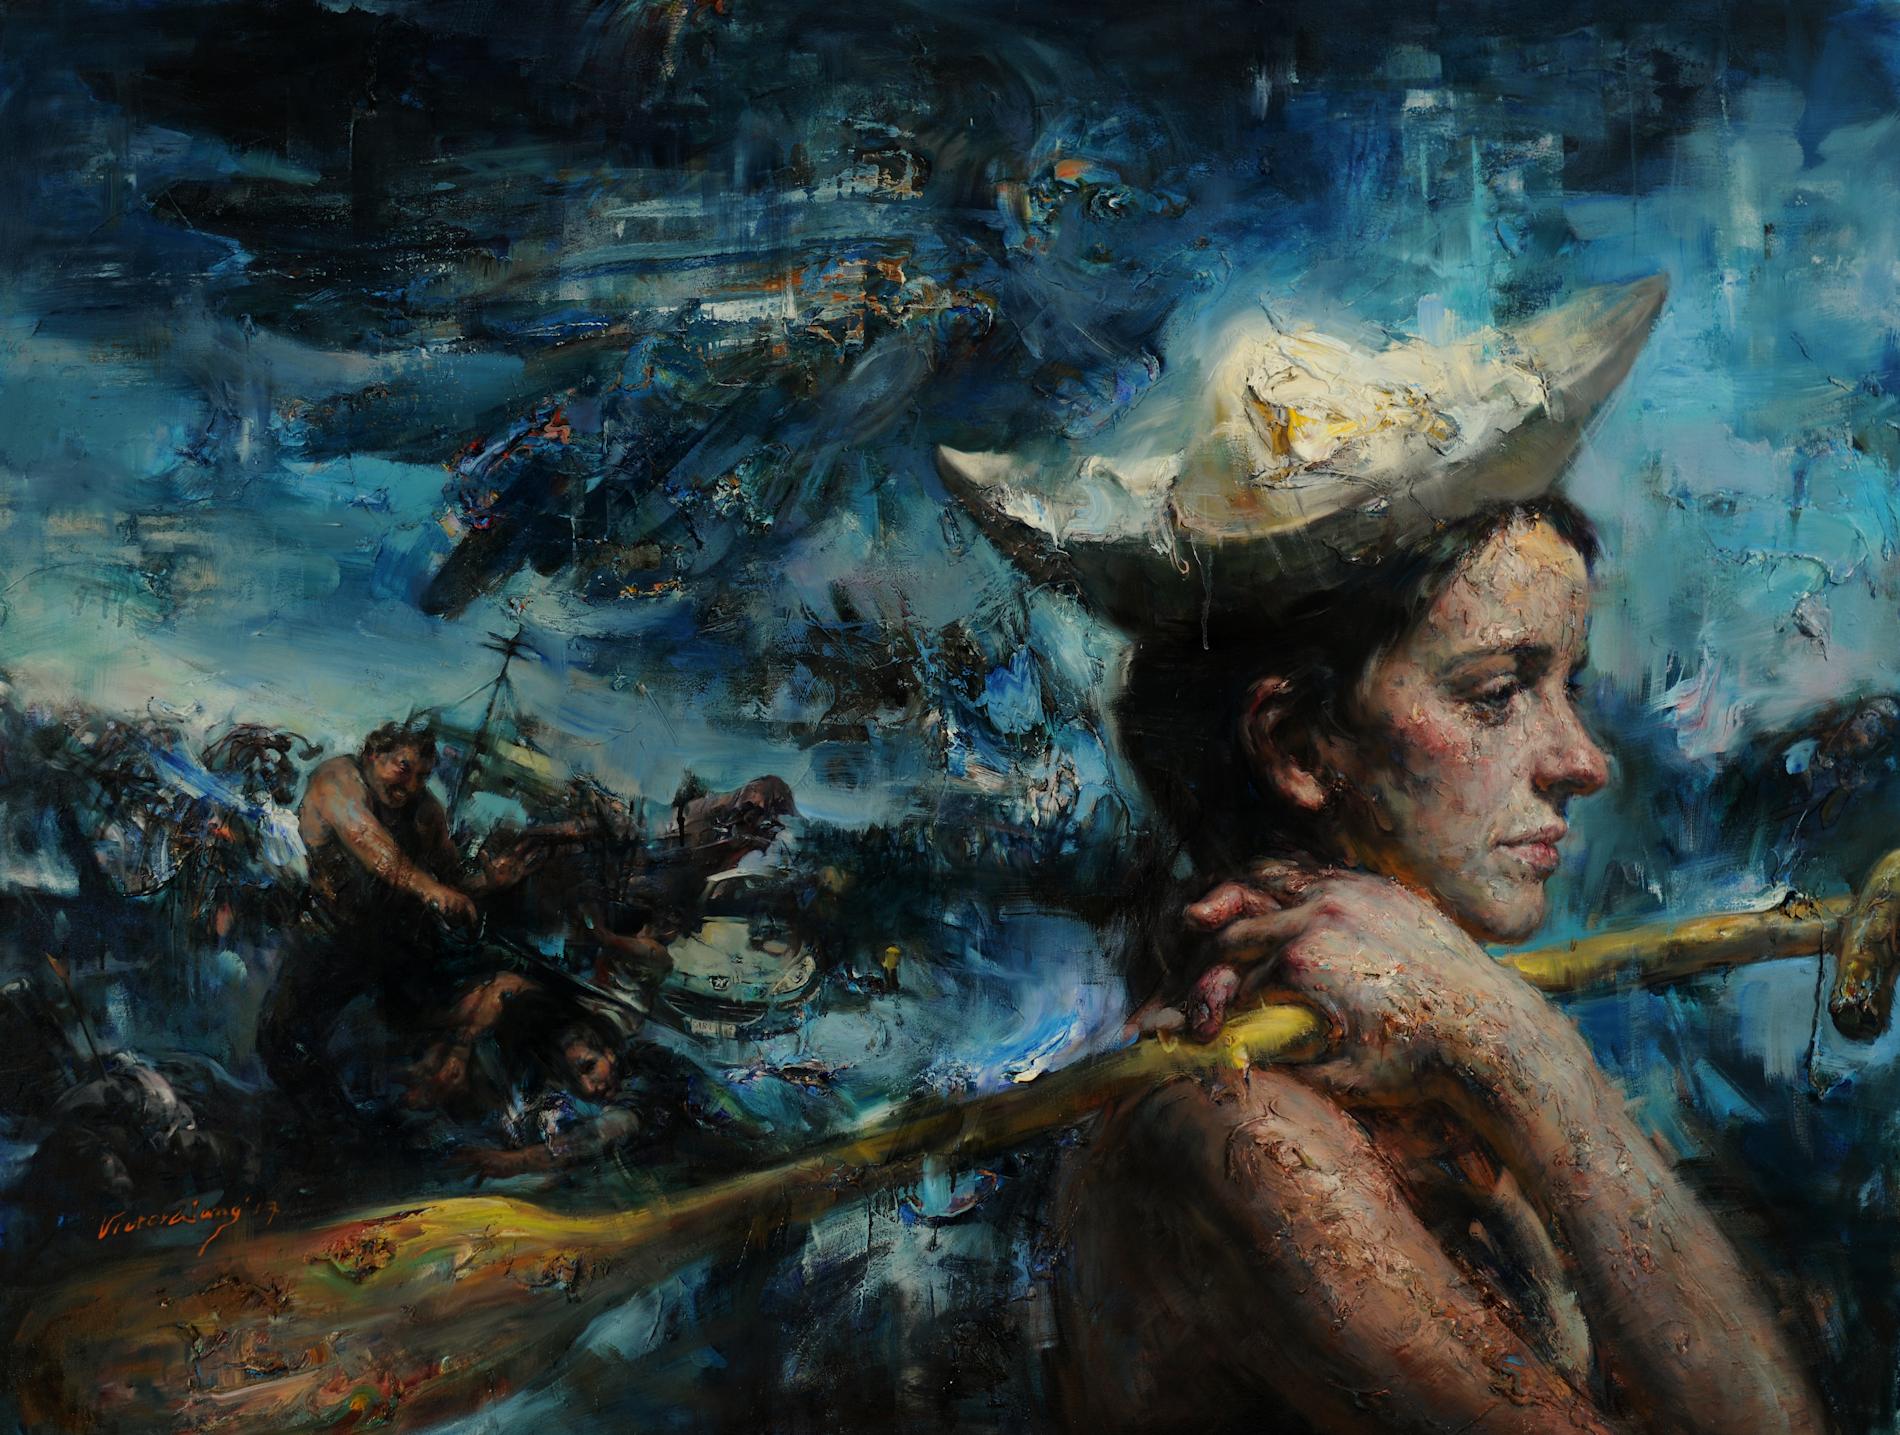 Victor Wang Figurative Painting - "Dreaming Away", Contemporary, Figurative, Abstract, Oil Paint, Canvas, Texture